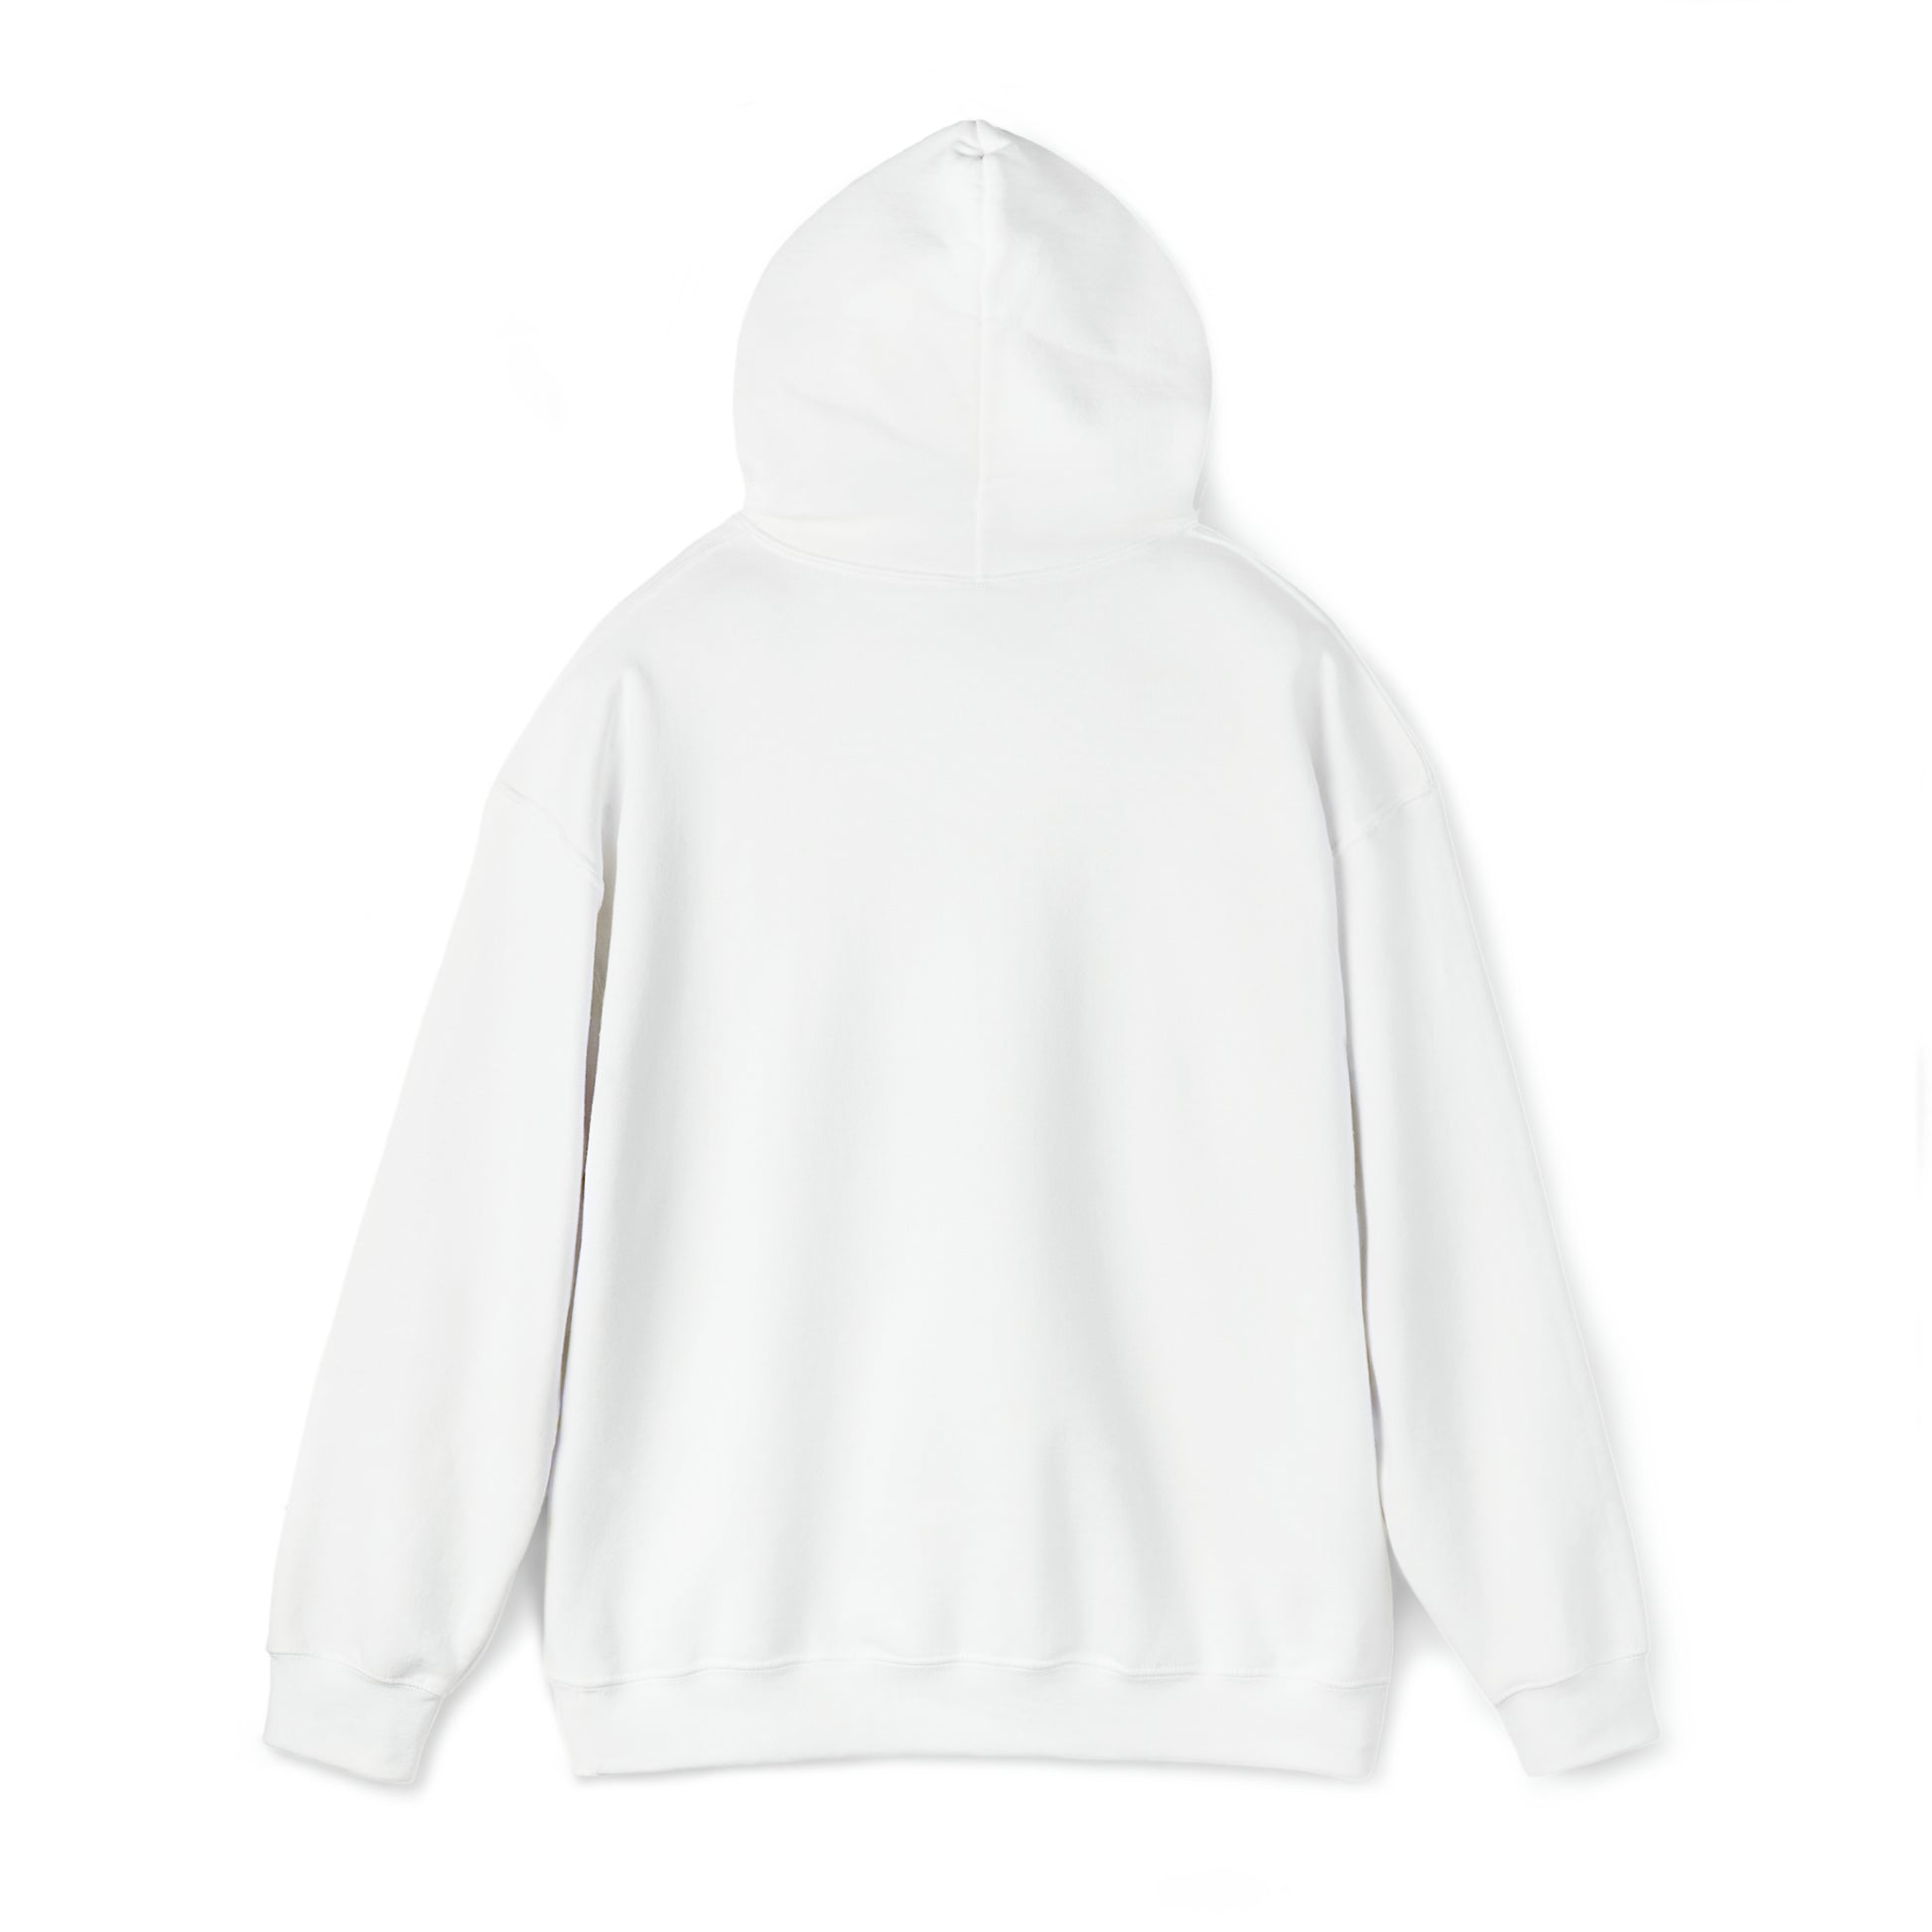 A plain white Unisex Heavy Blend™ Hooded Sweatshirt displayed on a white background, viewed from the back with the hood up, featuring a small embroidered "Cabbagetown" detail on the lower right. (Printify)